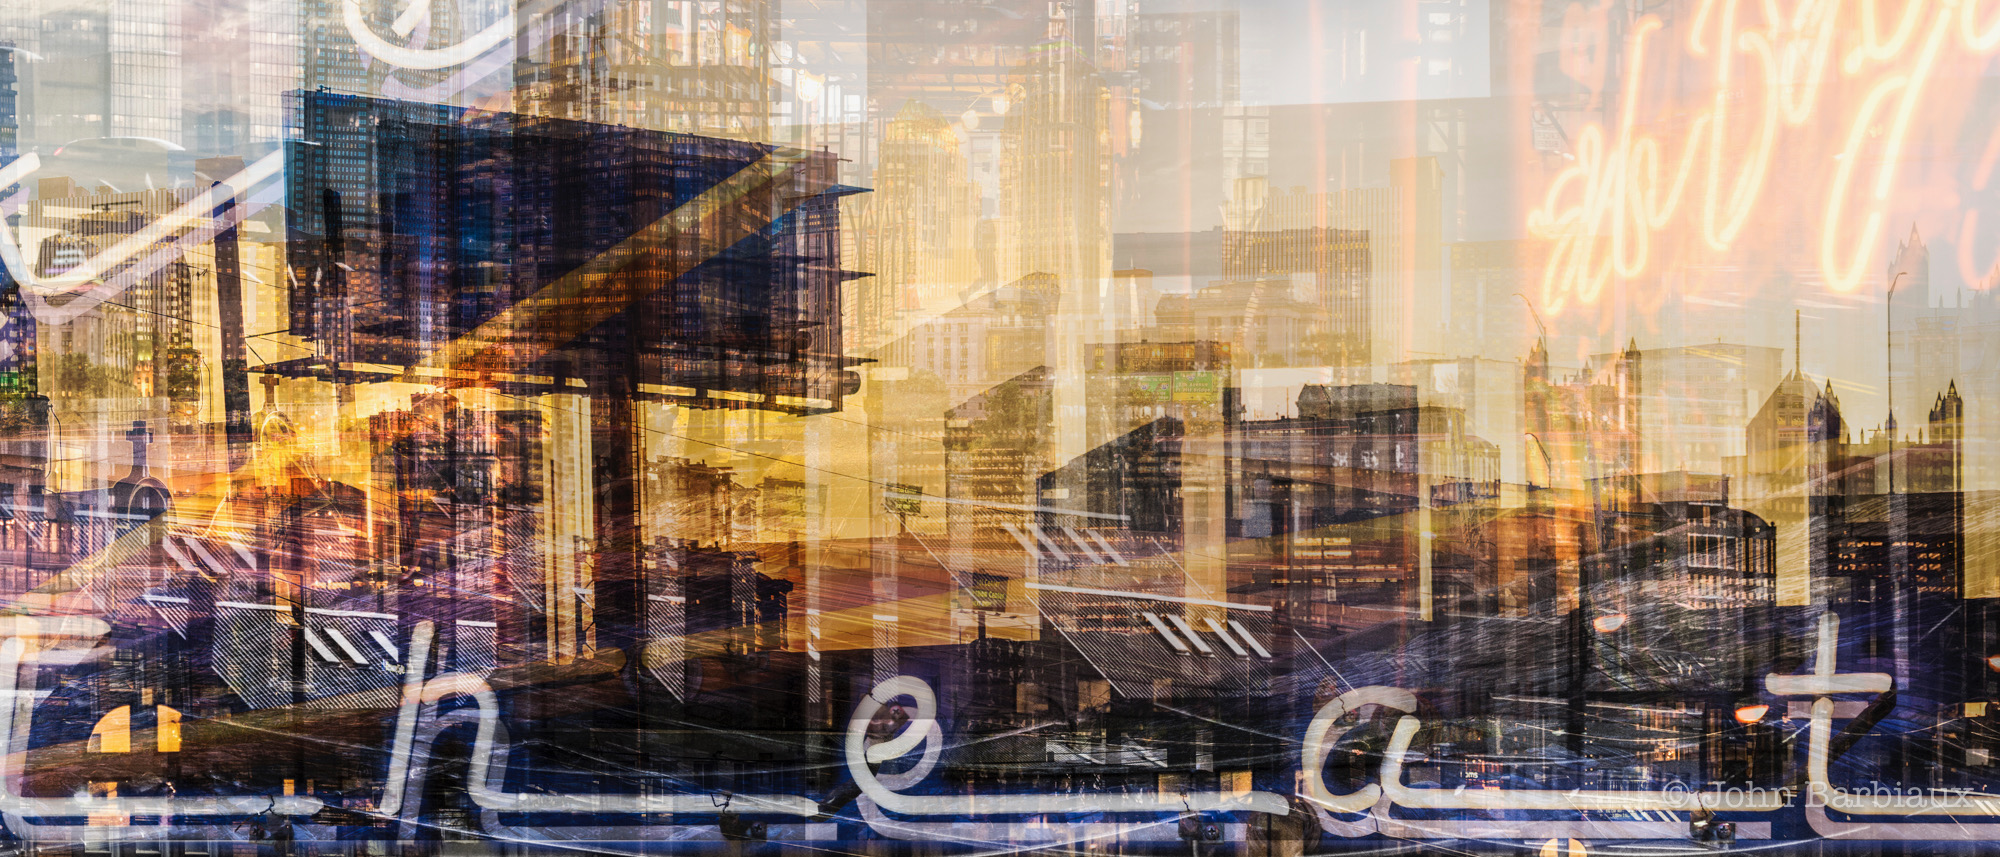 pittsburgh, fine art, abstract, photography, fractal cityscape, street photography, cityscape